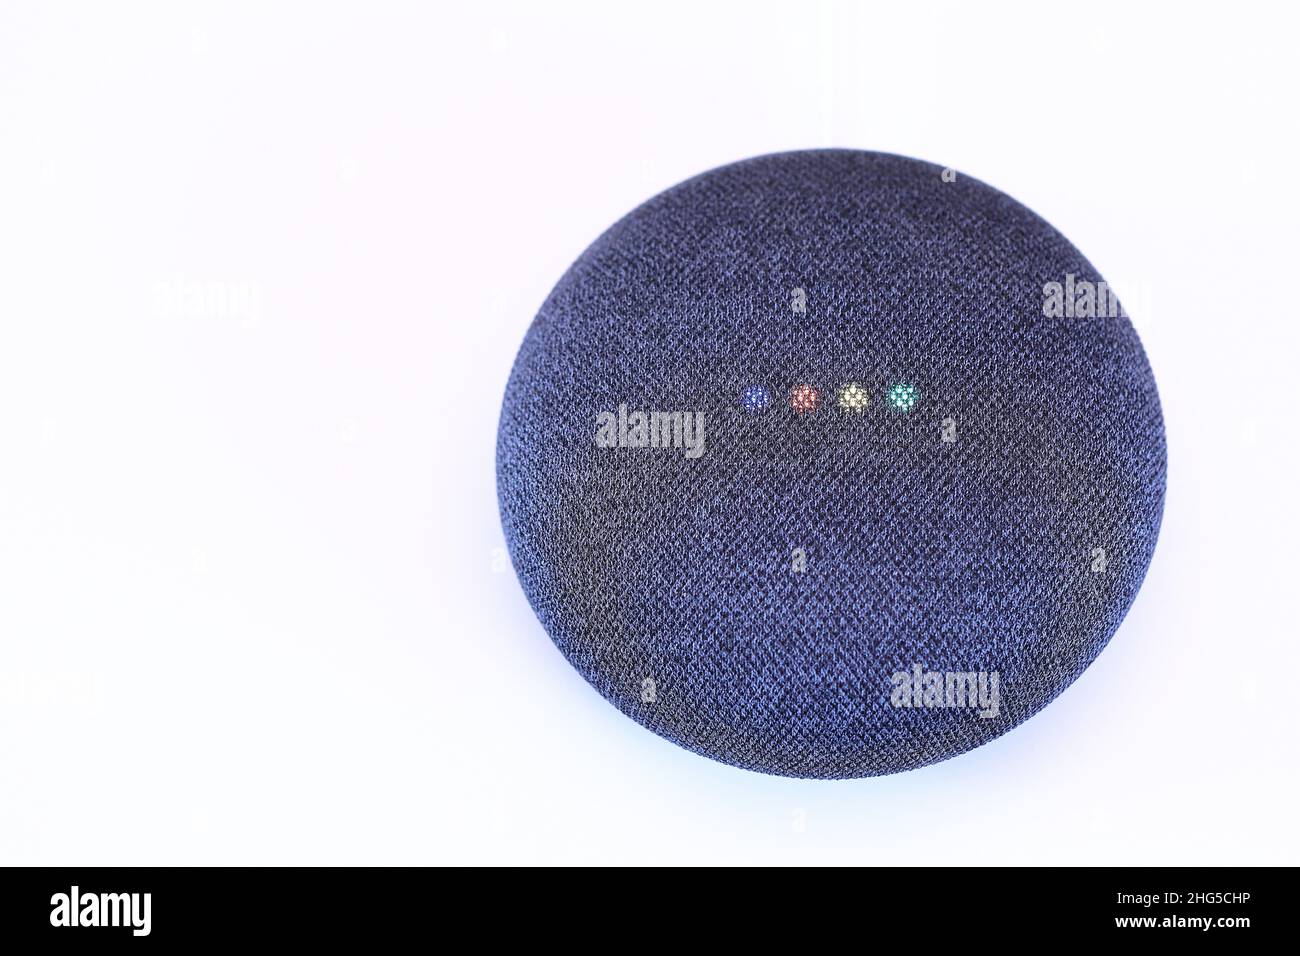 iot device, smart home device, smart home speaker device show with startup light status isolate on white background. Digital Assistant concept. Stock Photo